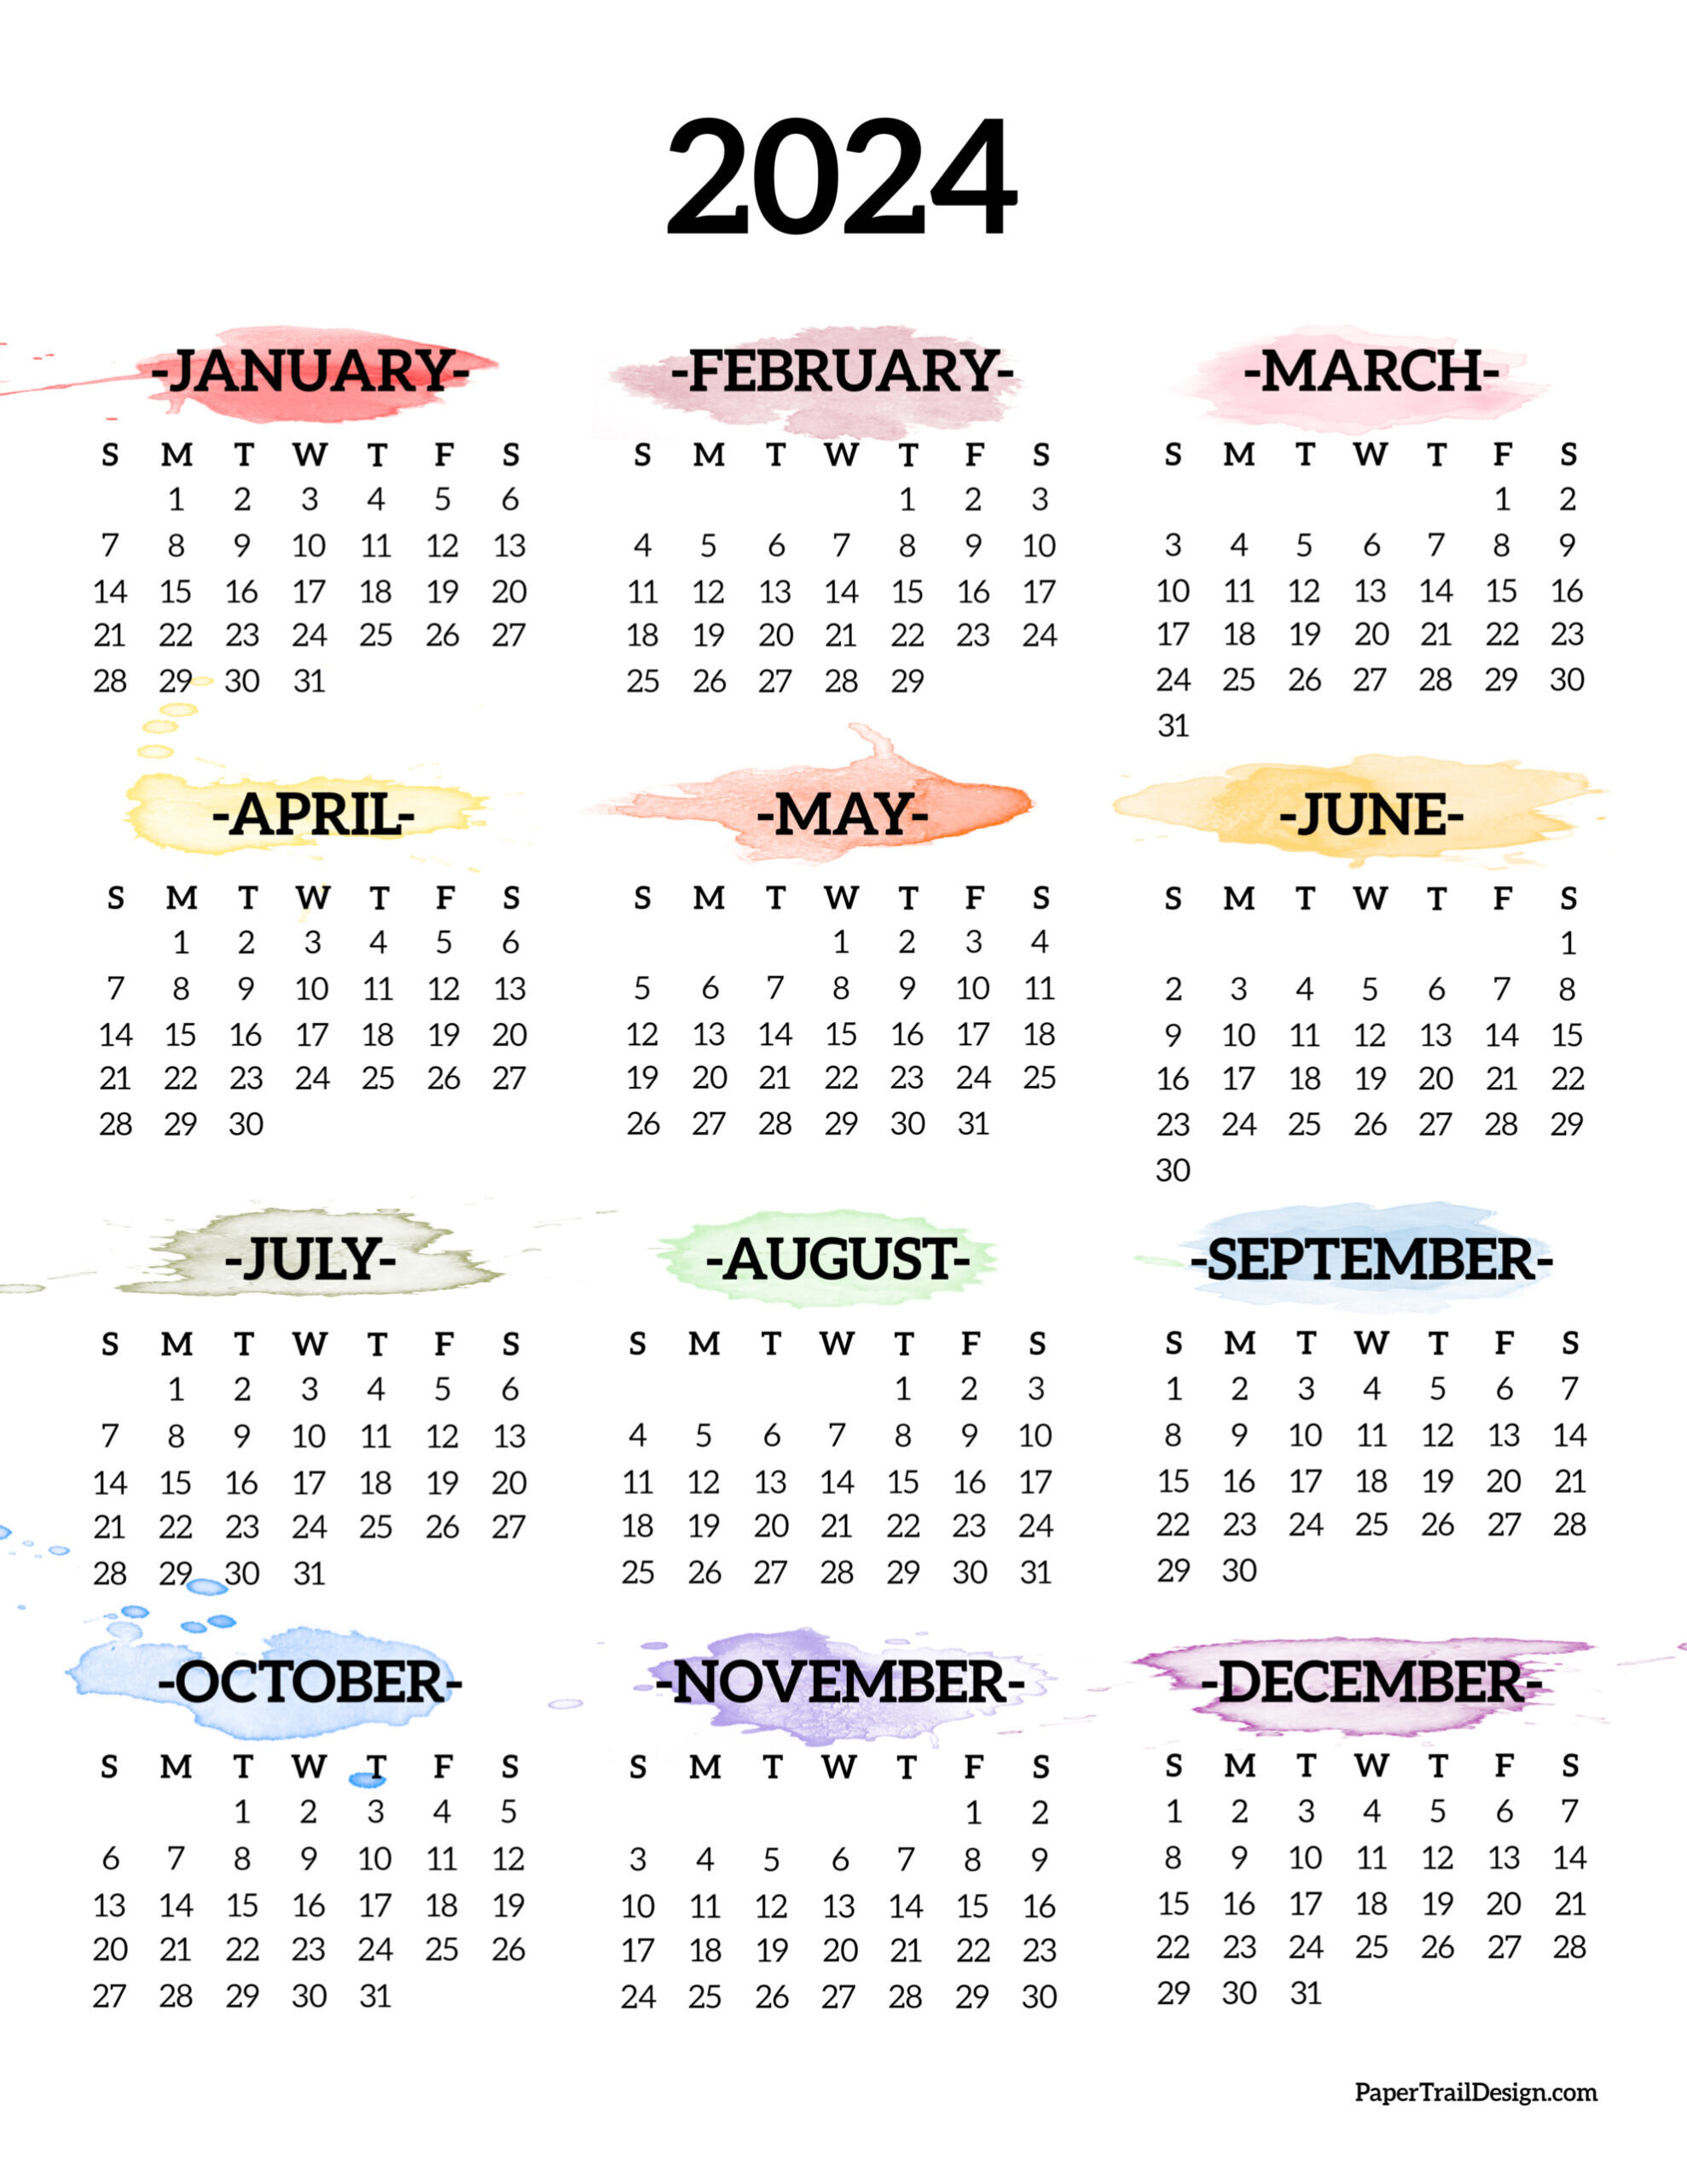 Calendar 2024 Printable One Page - Paper Trail Design for 2024 Calendar Printable One Page Free